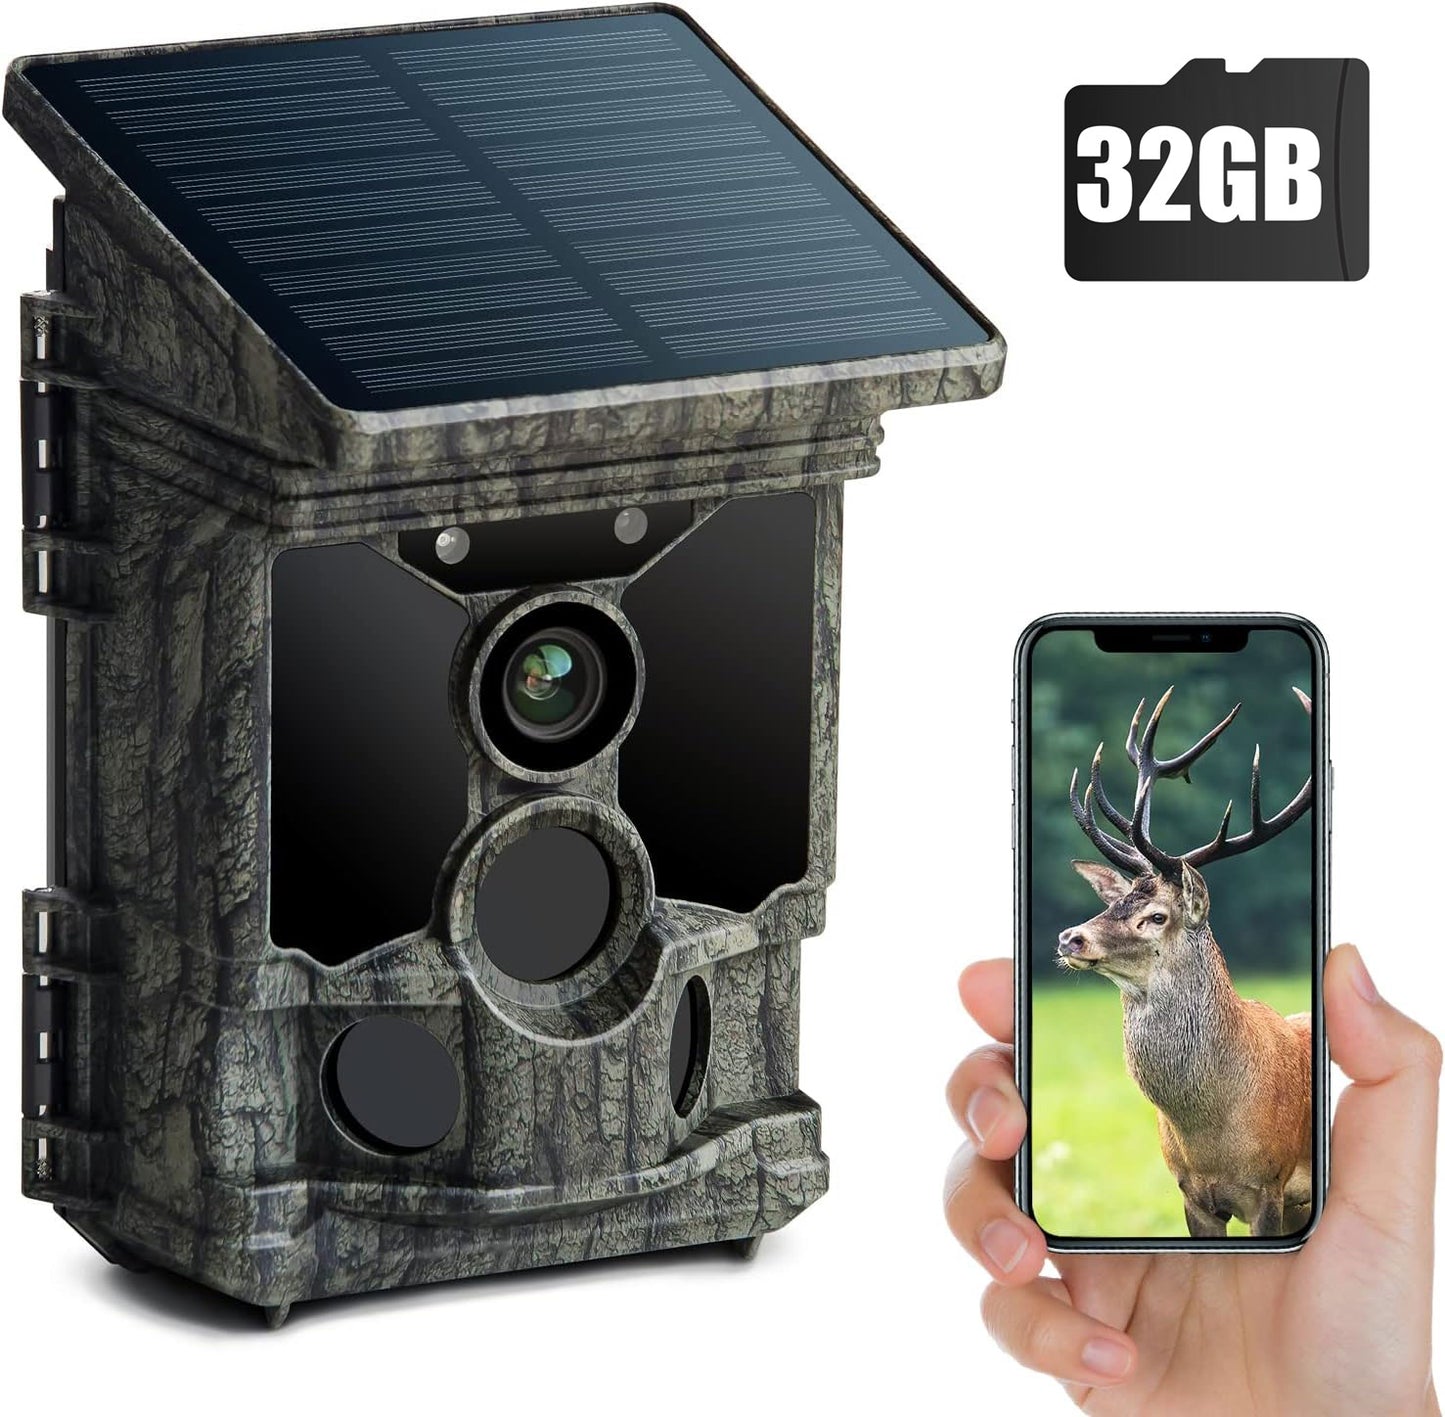 CAMPARK Solar WiFi Trail Camera Native 4K 30fps 46MP Super Concealment Hunting Deer Game Camera wtih 4400mAh Night Vision Motion Activated Waterproof IP66 Trail Wildlife Camera wtih SD Card